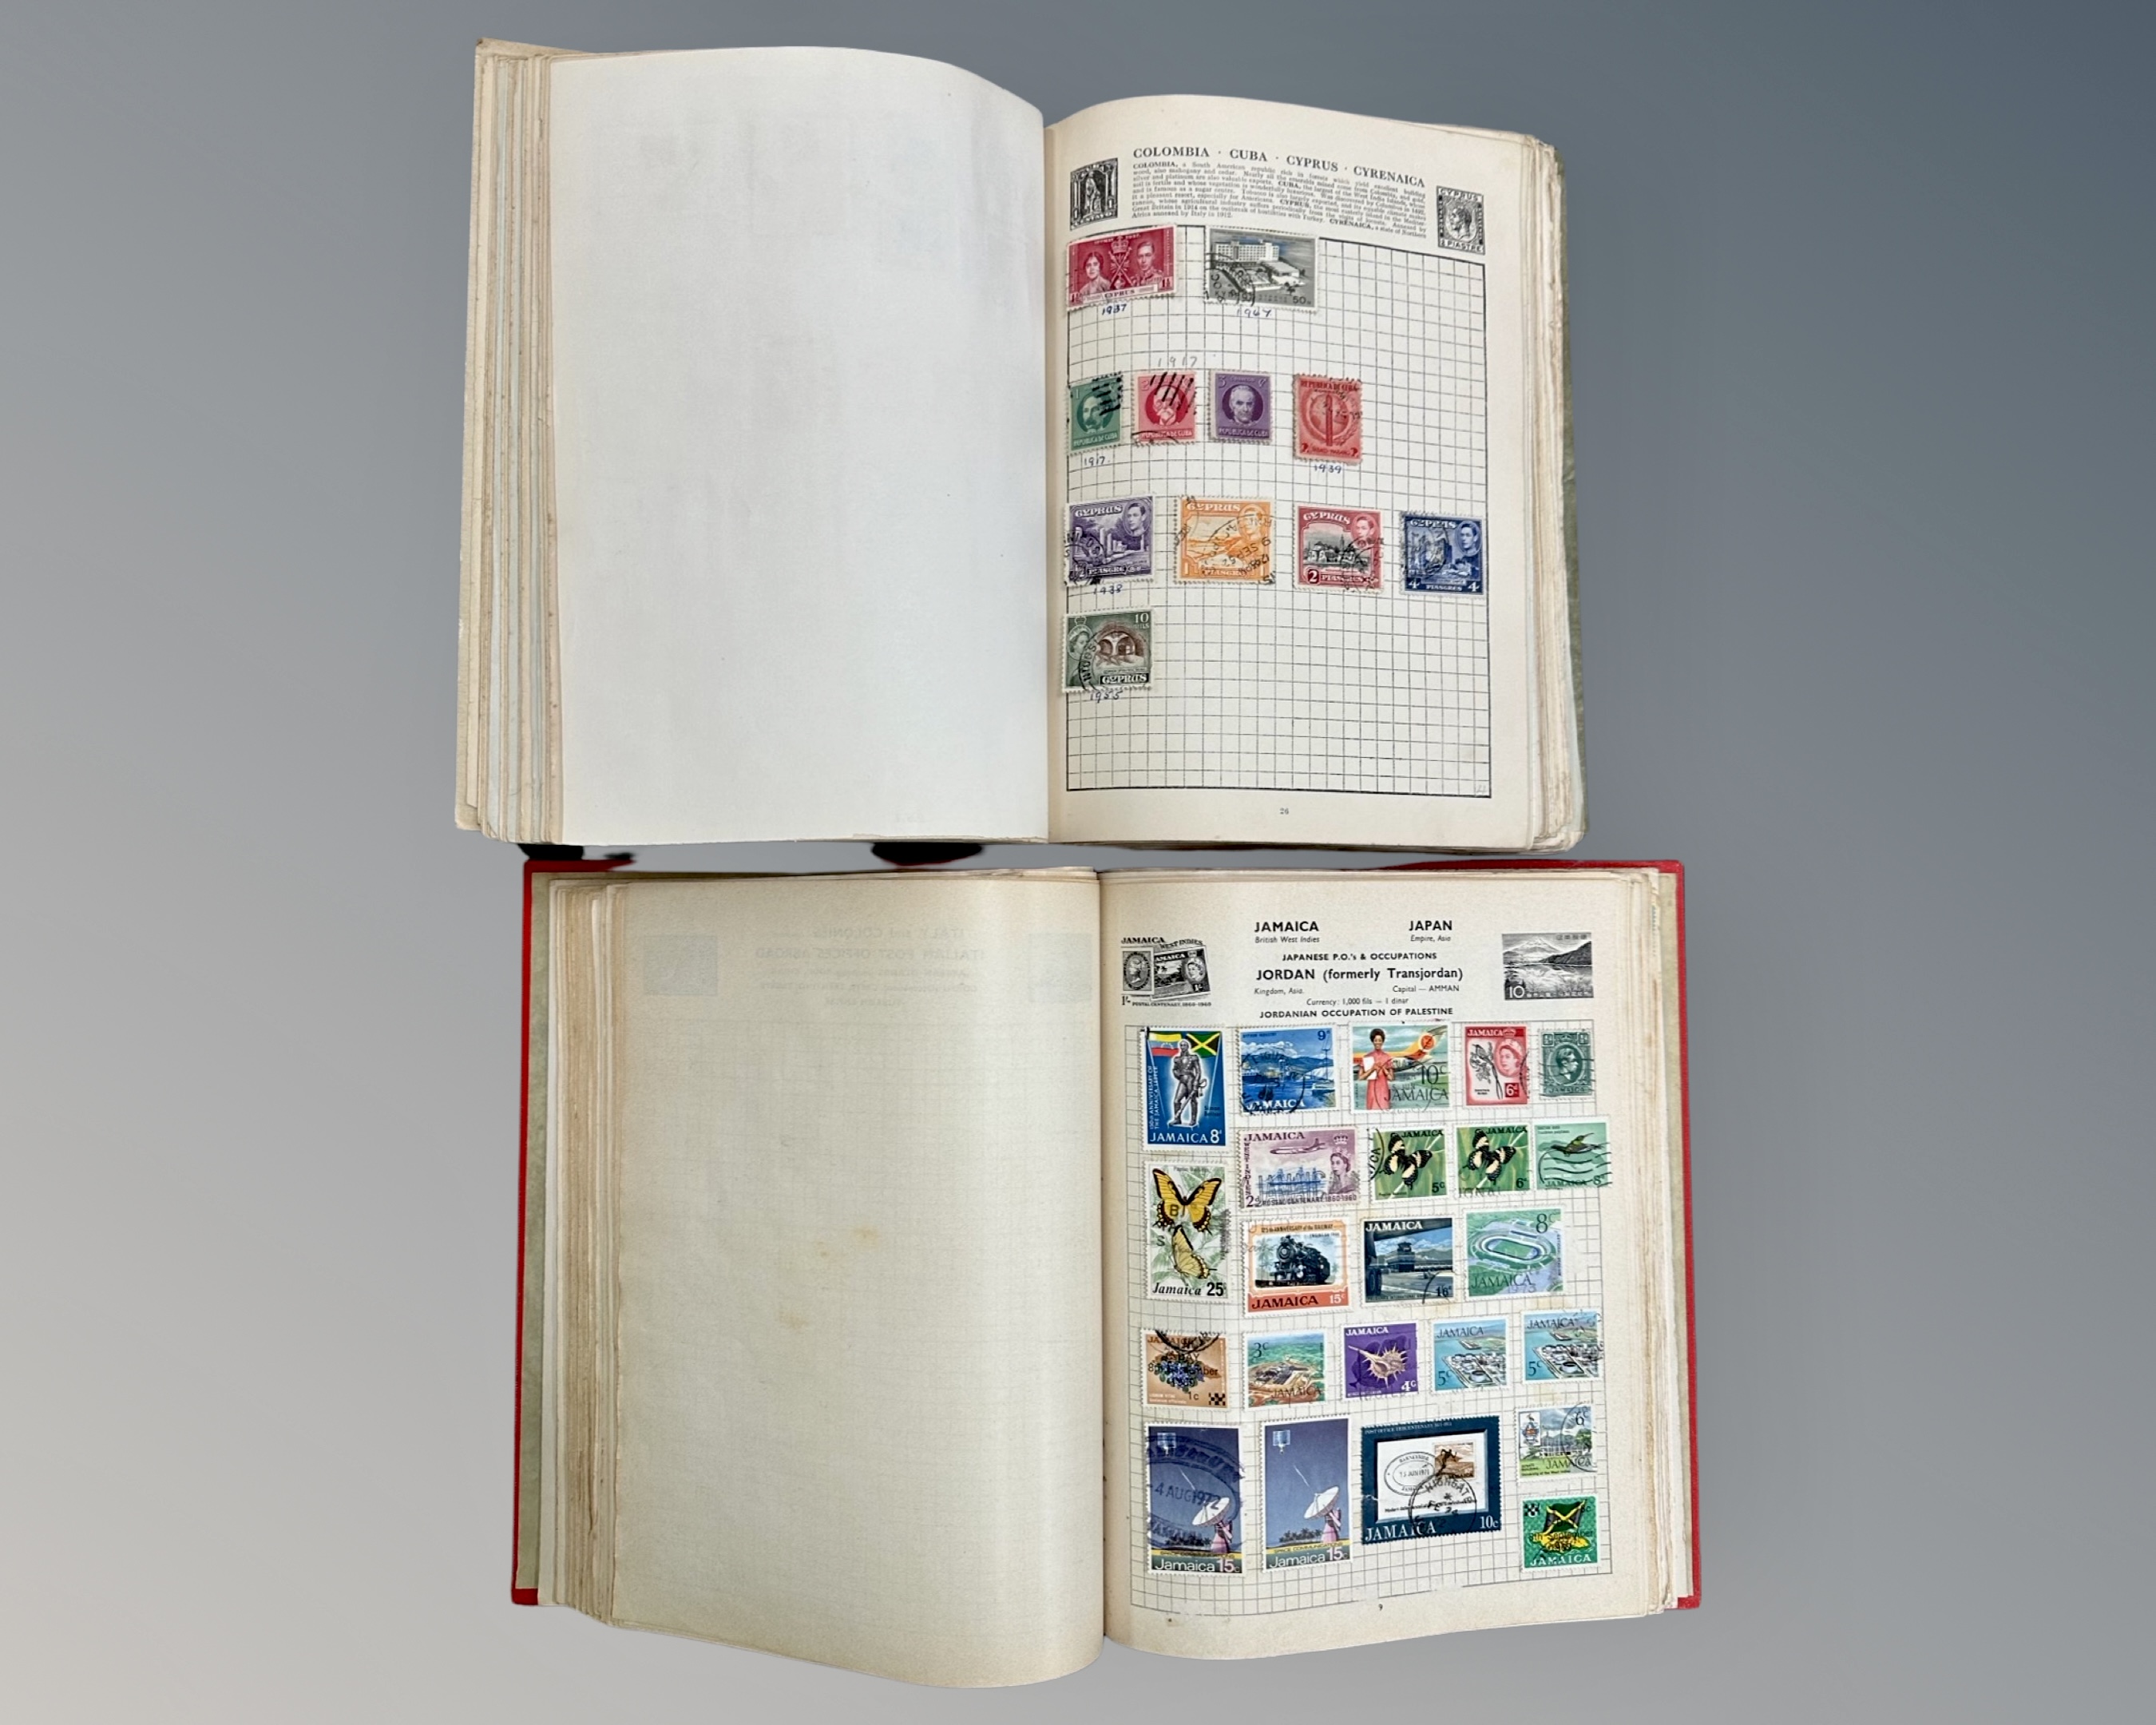 A Stanley Gibbons Swiftsure Expanding Stamp Album containing a collection of world stamps,